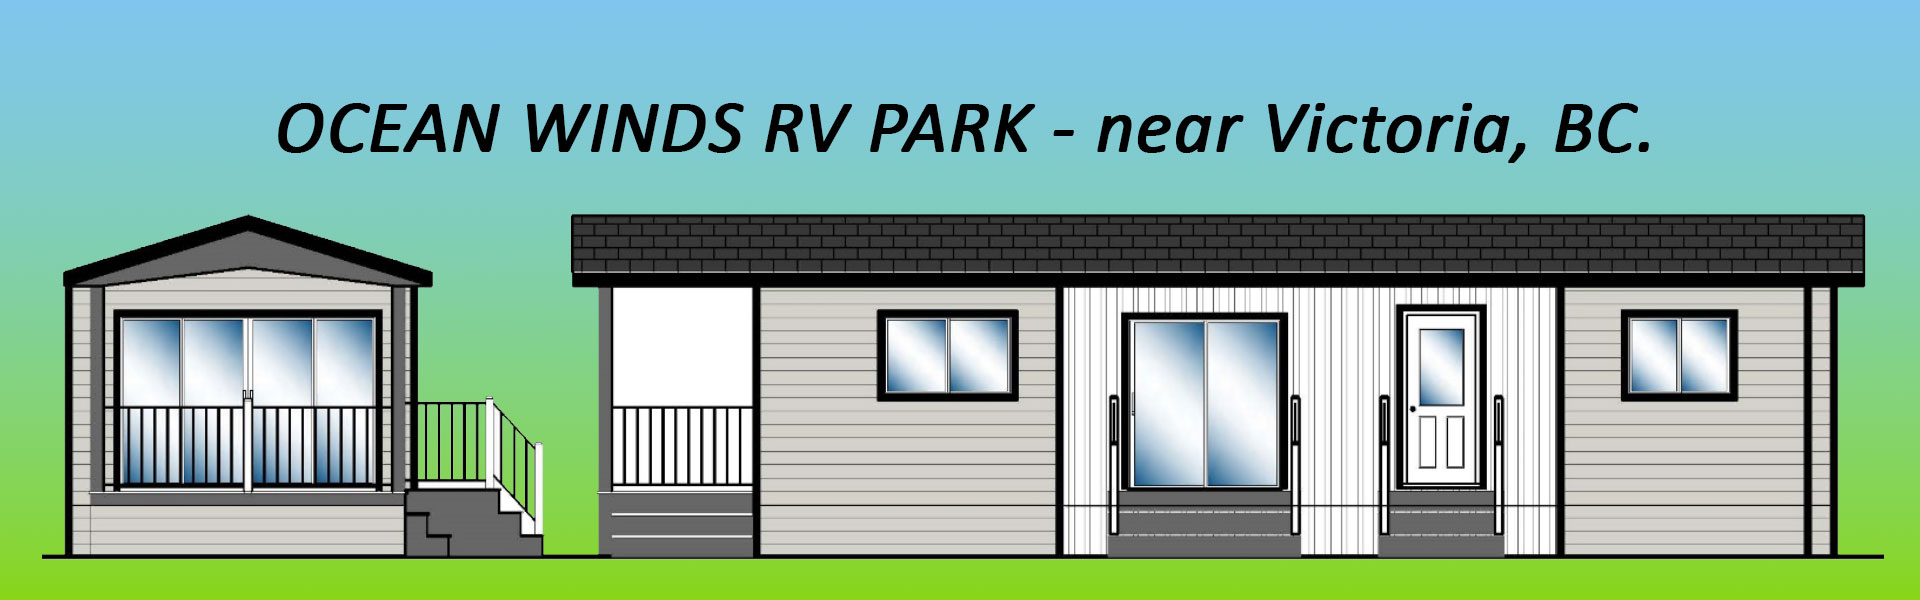 Modulux Design Ltd - offering a great Tiny Home model in a beautiful RV park only 20 minutes from Victoria, BC